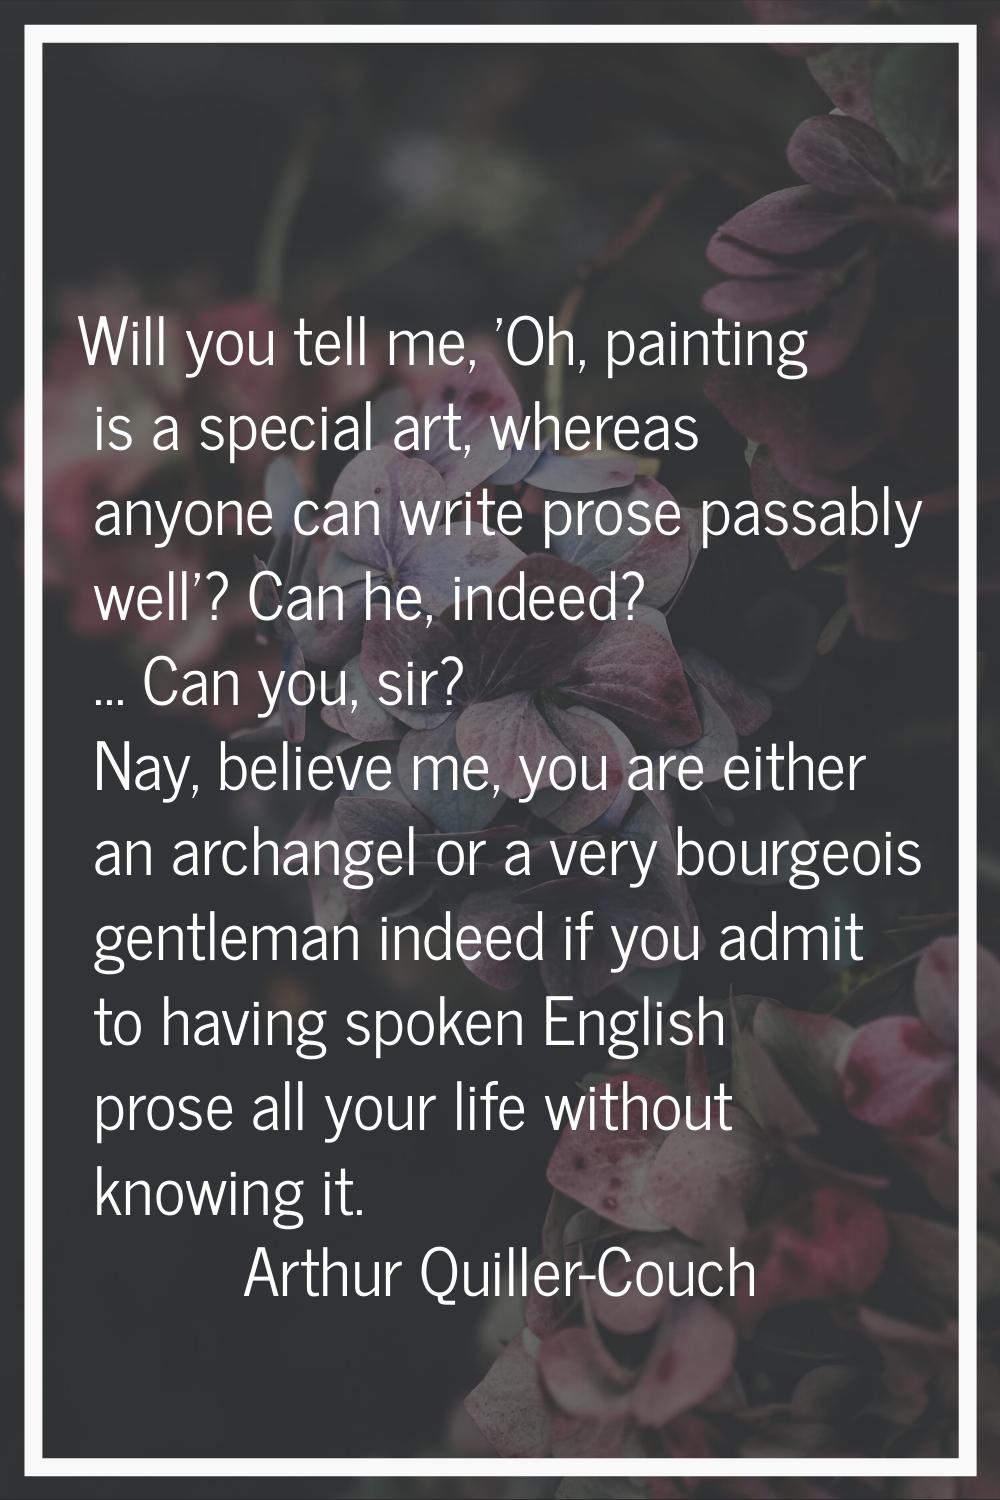 Will you tell me, 'Oh, painting is a special art, whereas anyone can write prose passably well'? Ca